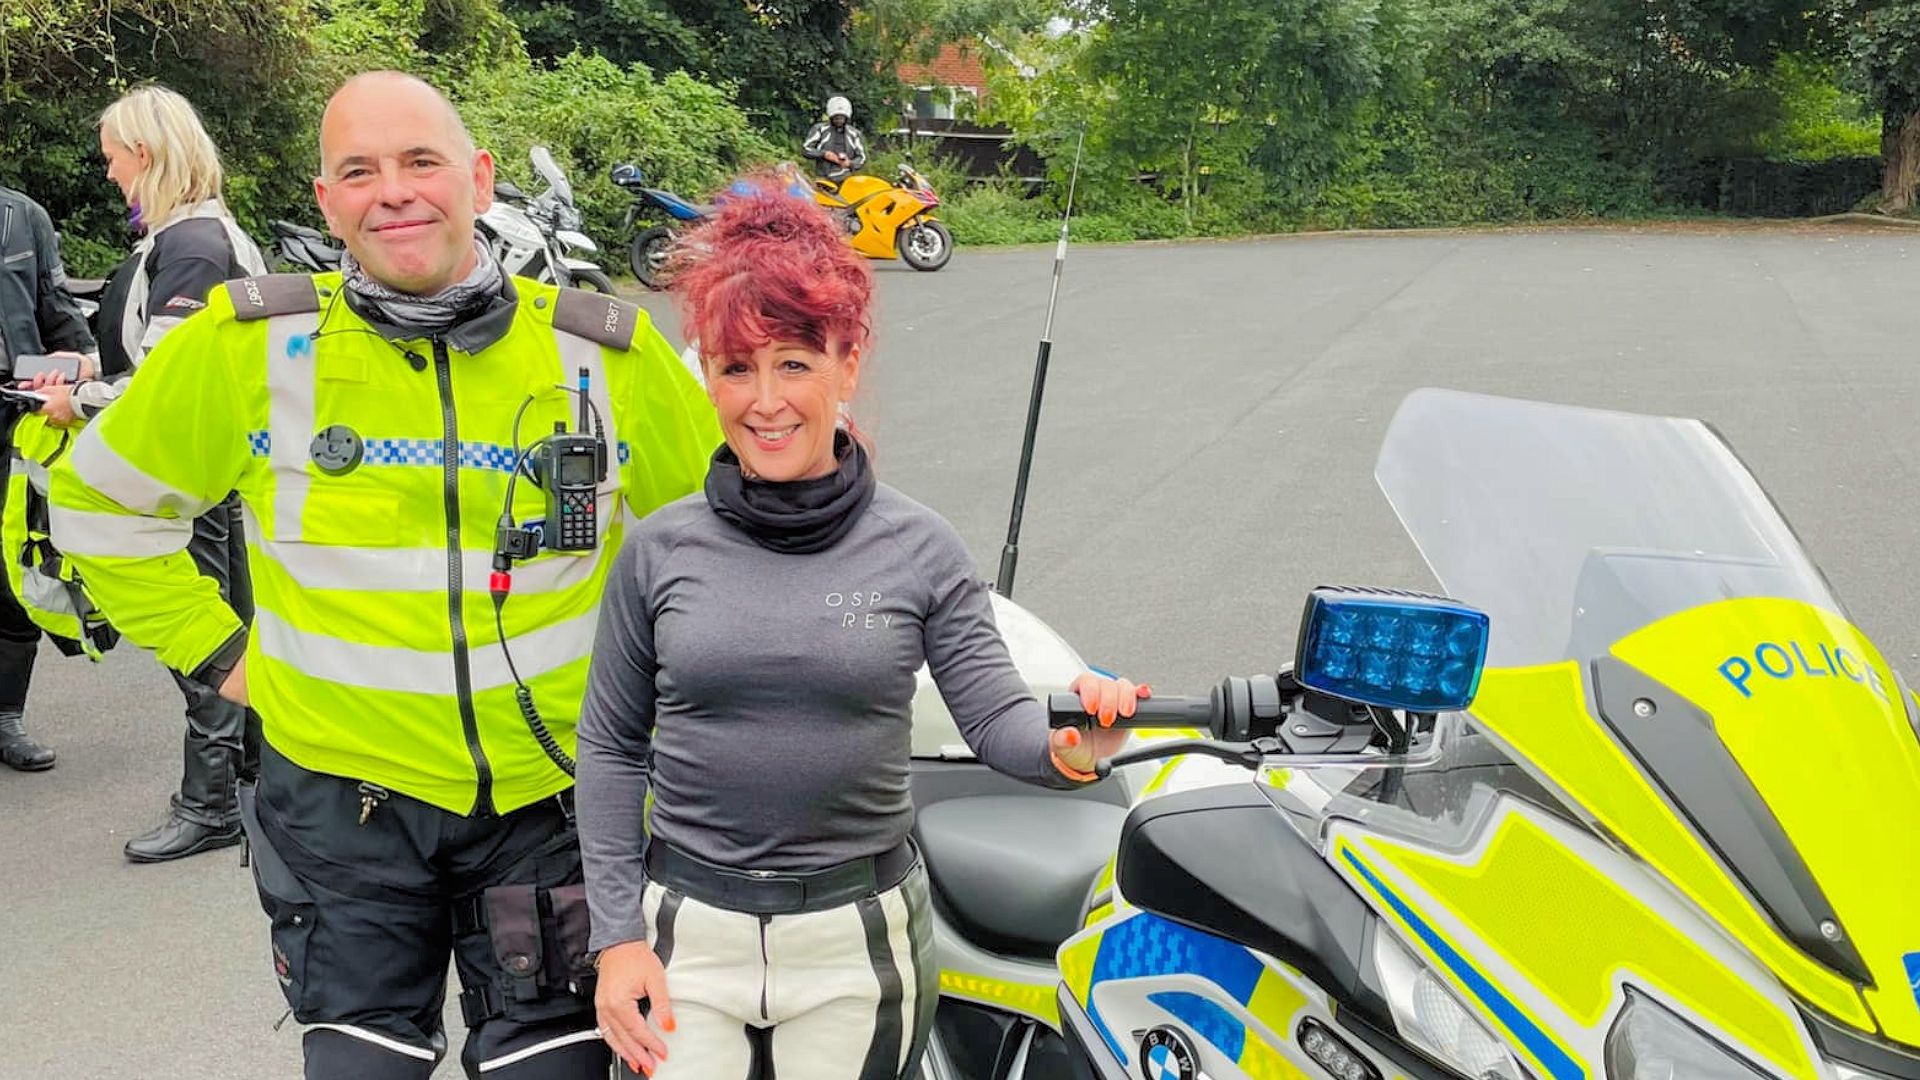 Attending BikeSafe with West Mercia Police August 2021